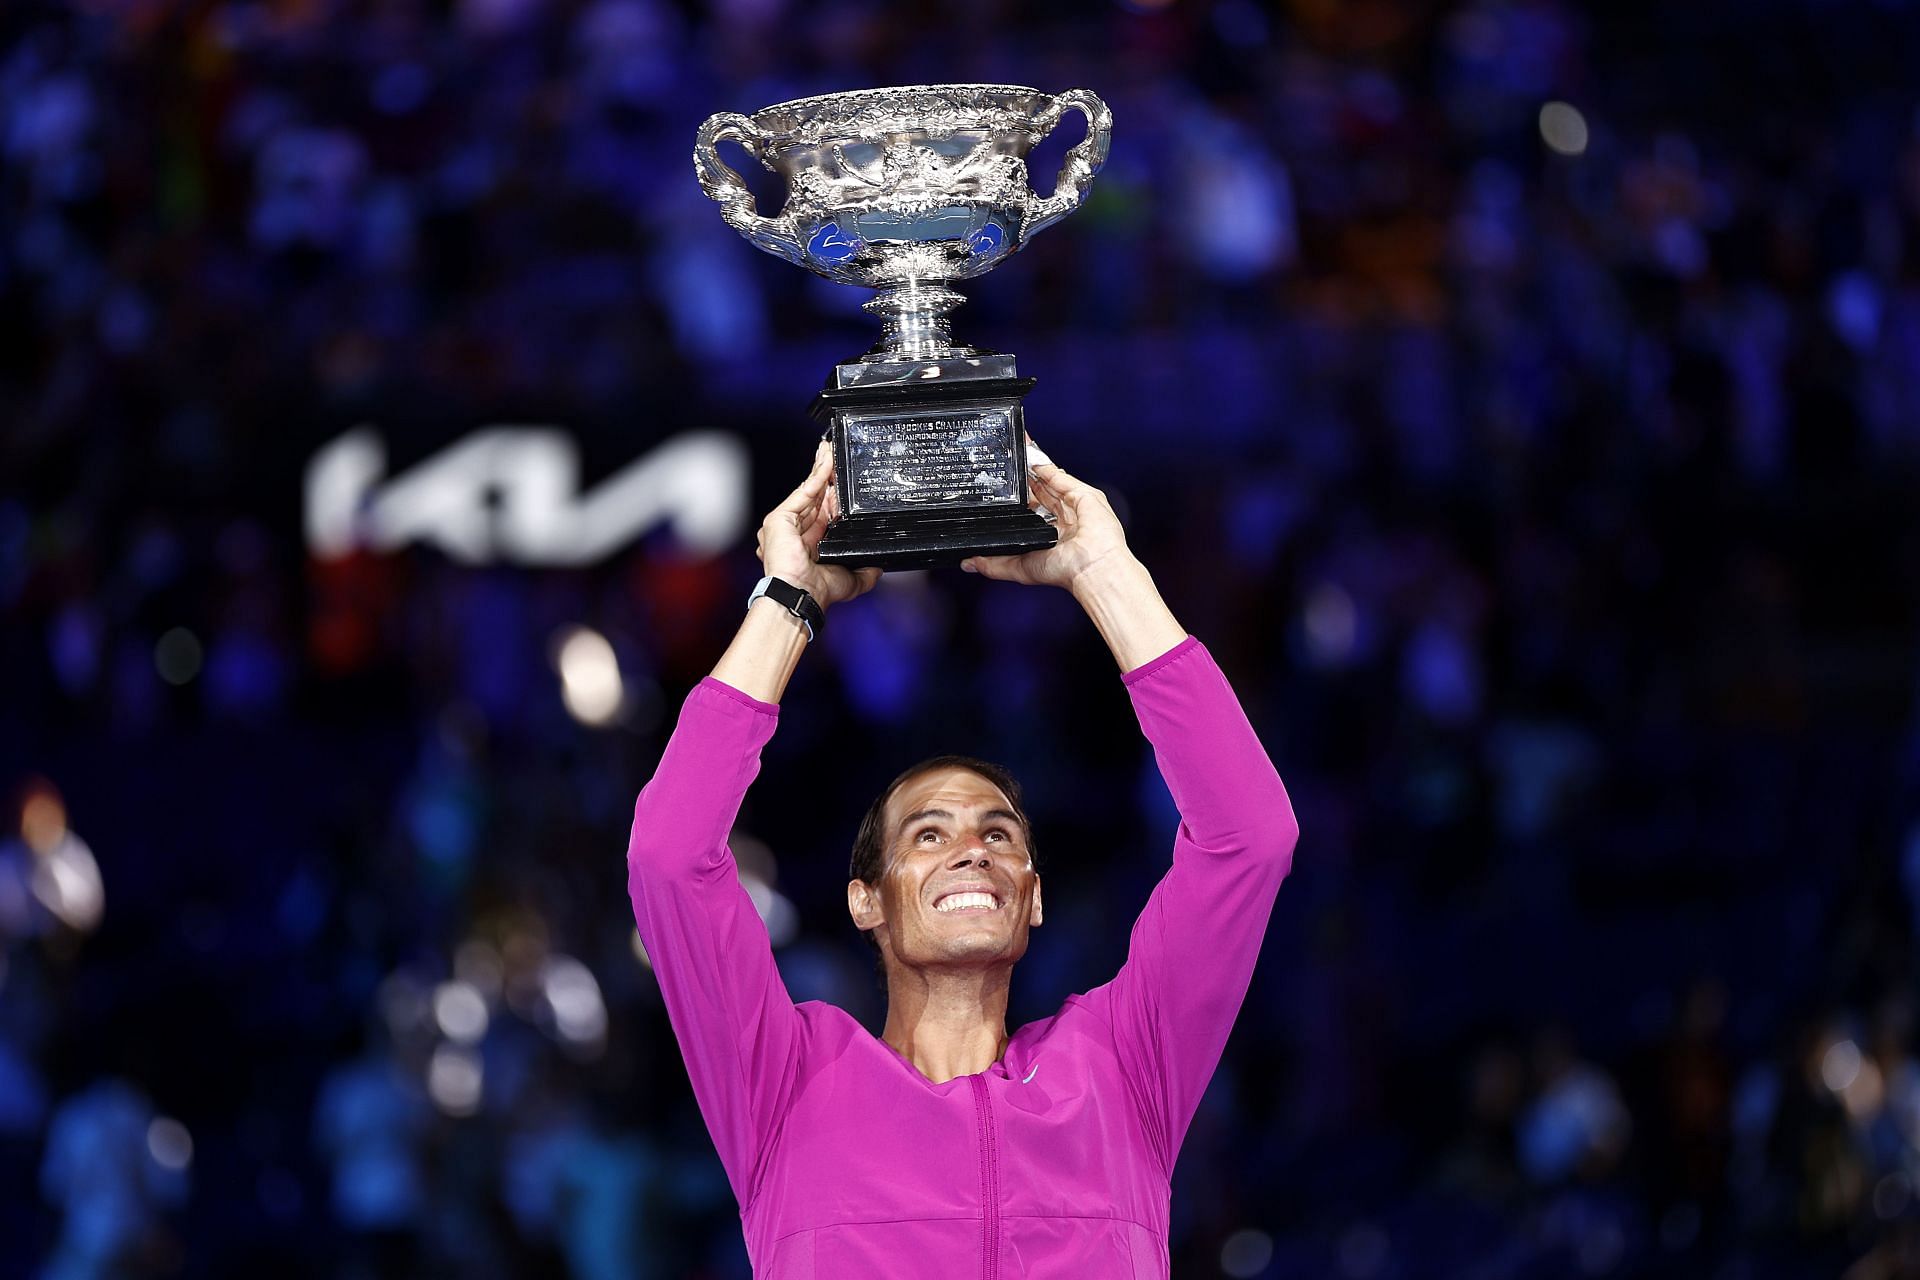 Rafael Nadal created history with his Australian Open victory